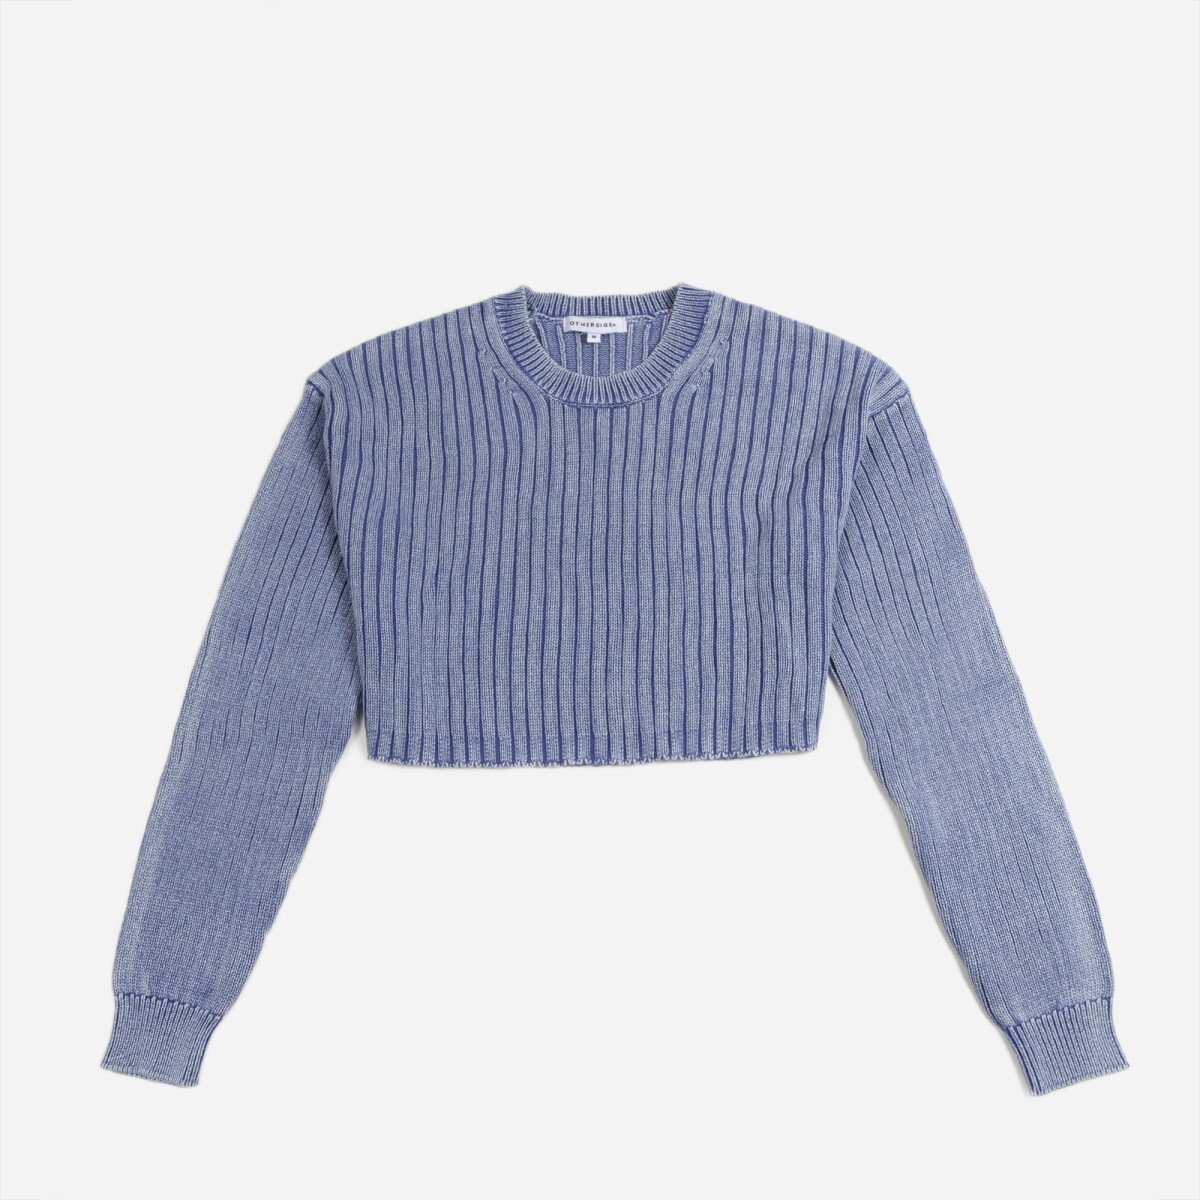 Sweater cropped - Mujer - CELESTE 